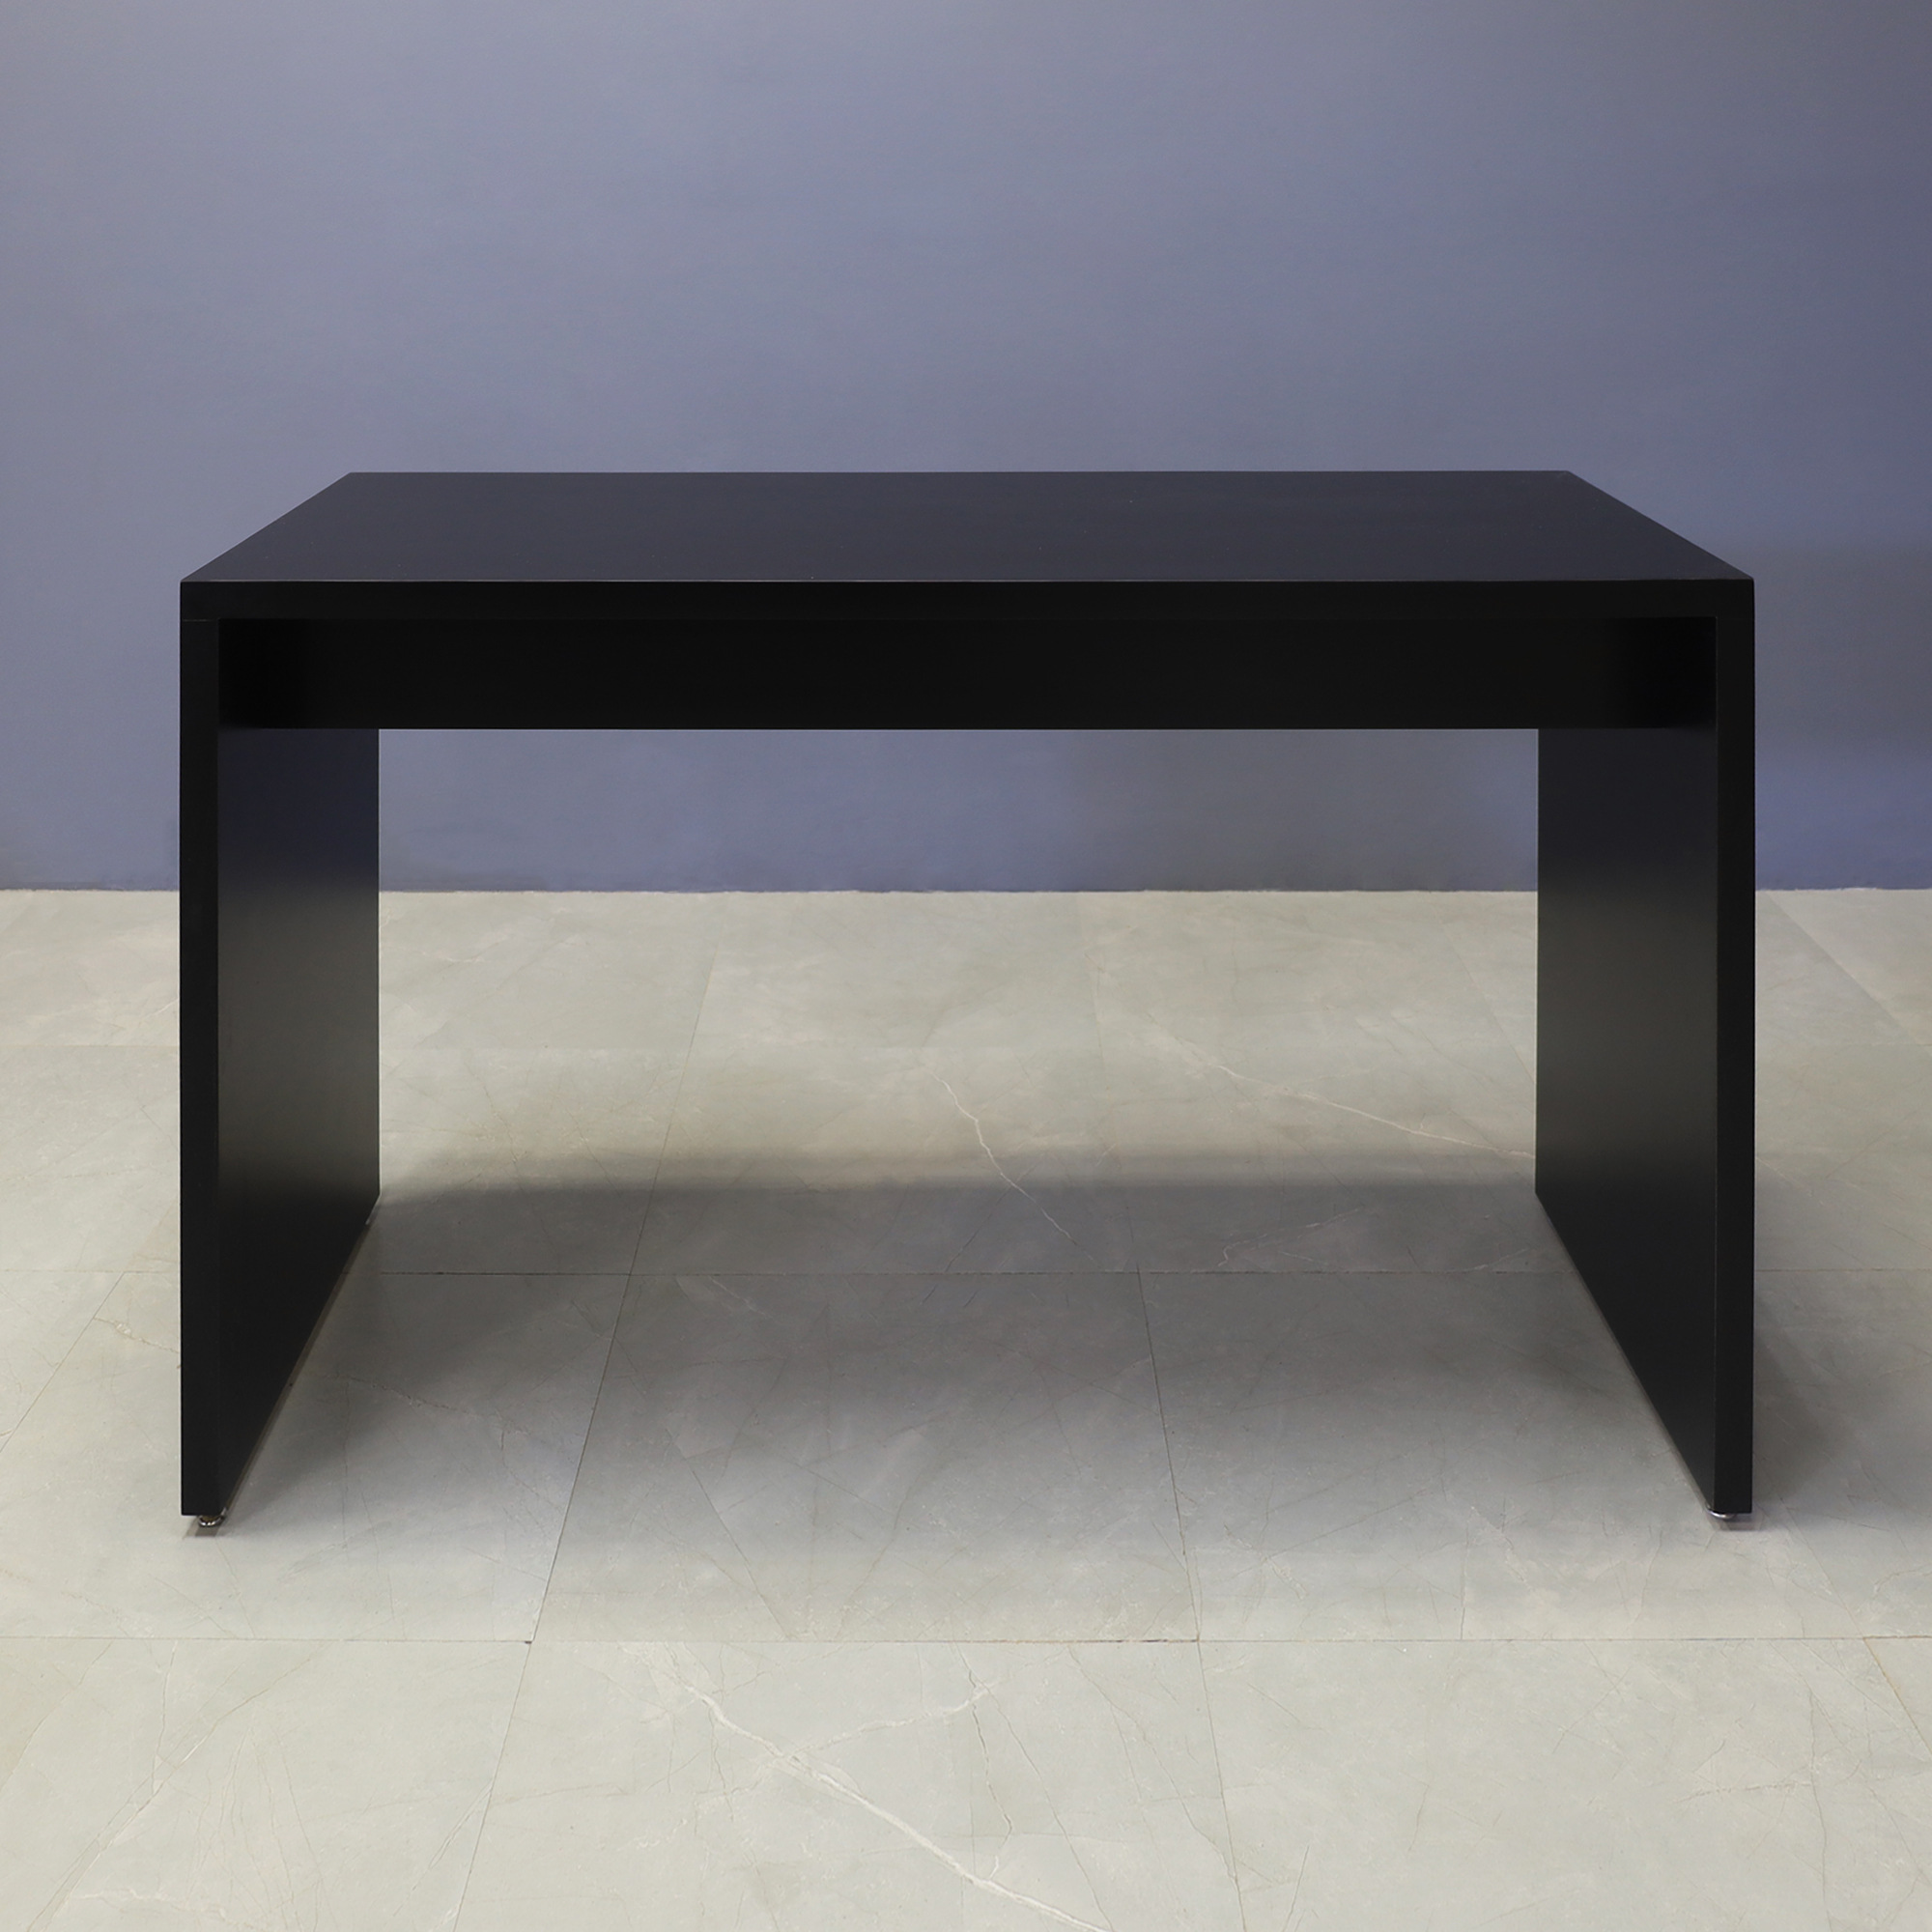 72-inch width x 36-inch height, Ashville Laminate Collaboration Table in black matte laminate, shown here.